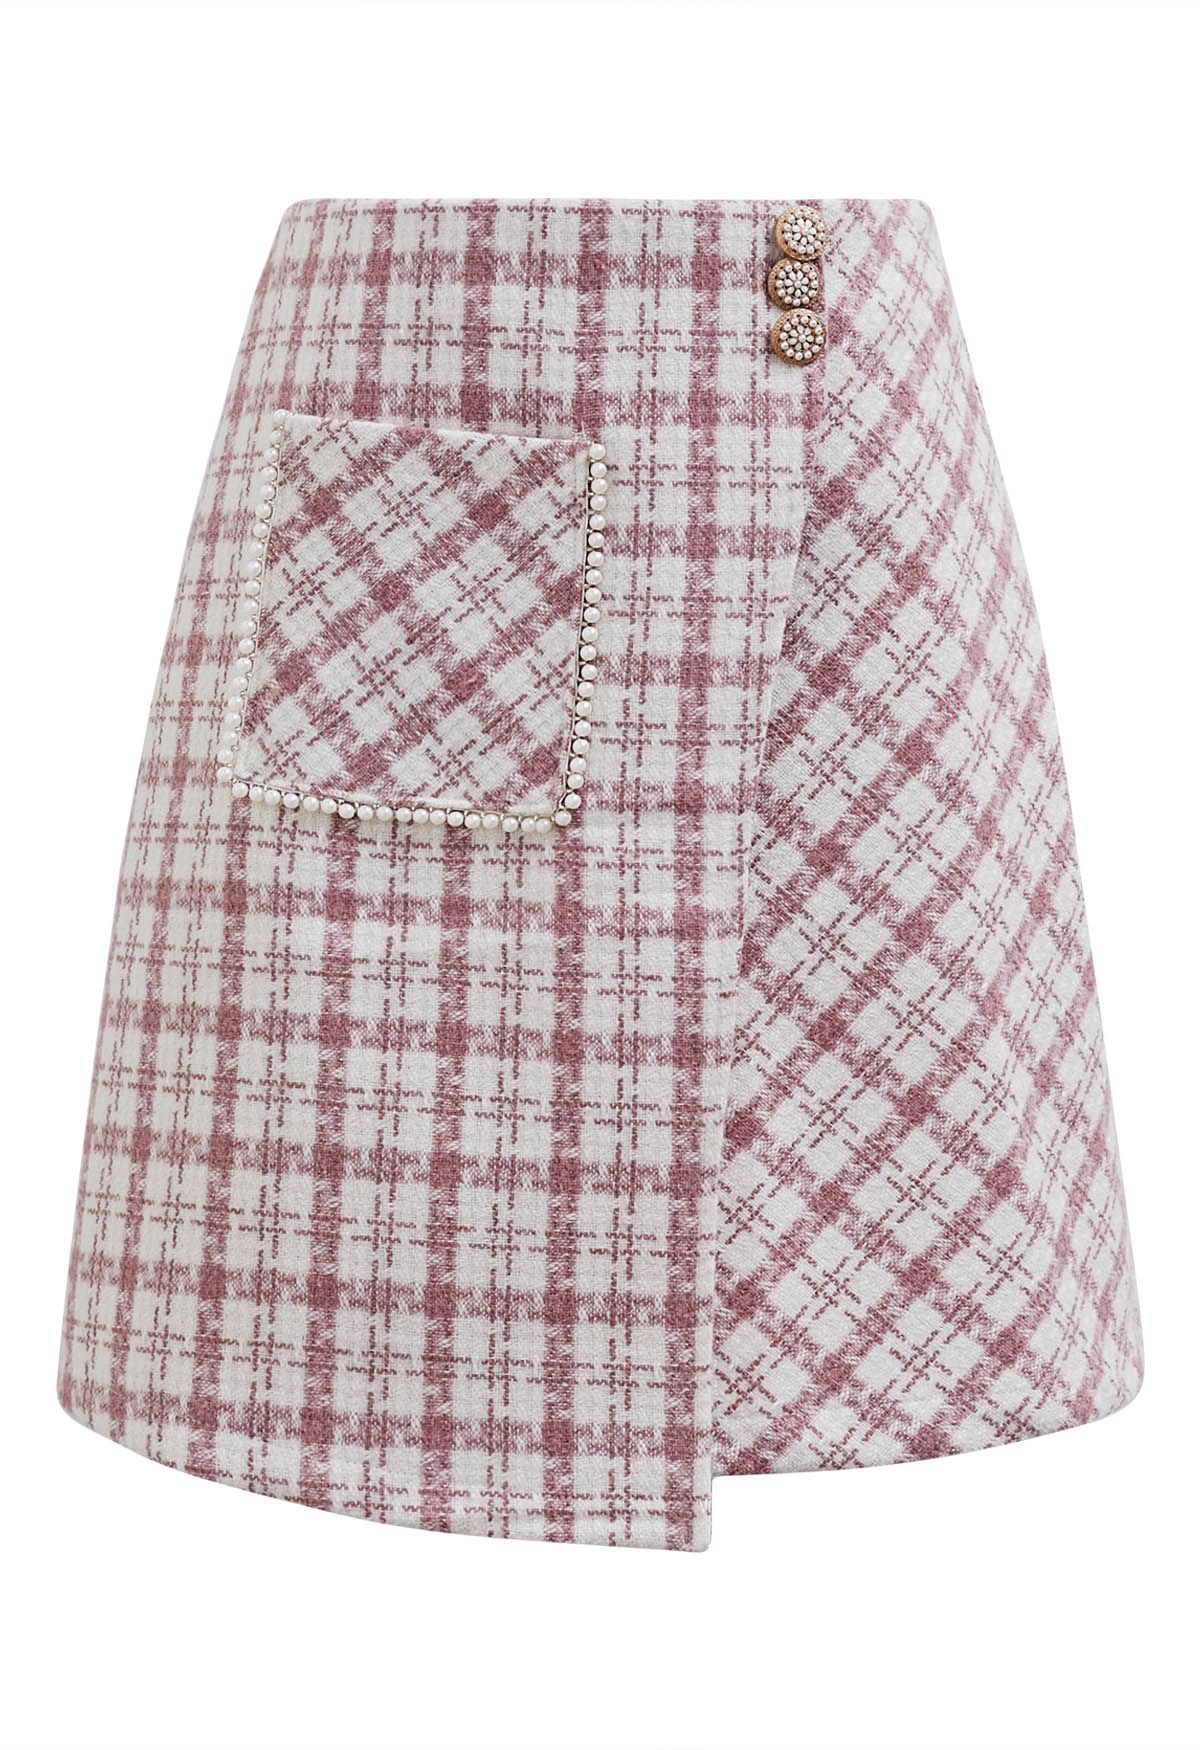 Patch Pocket Plaid Tweed Flap Skirt in Pink | Chicwish